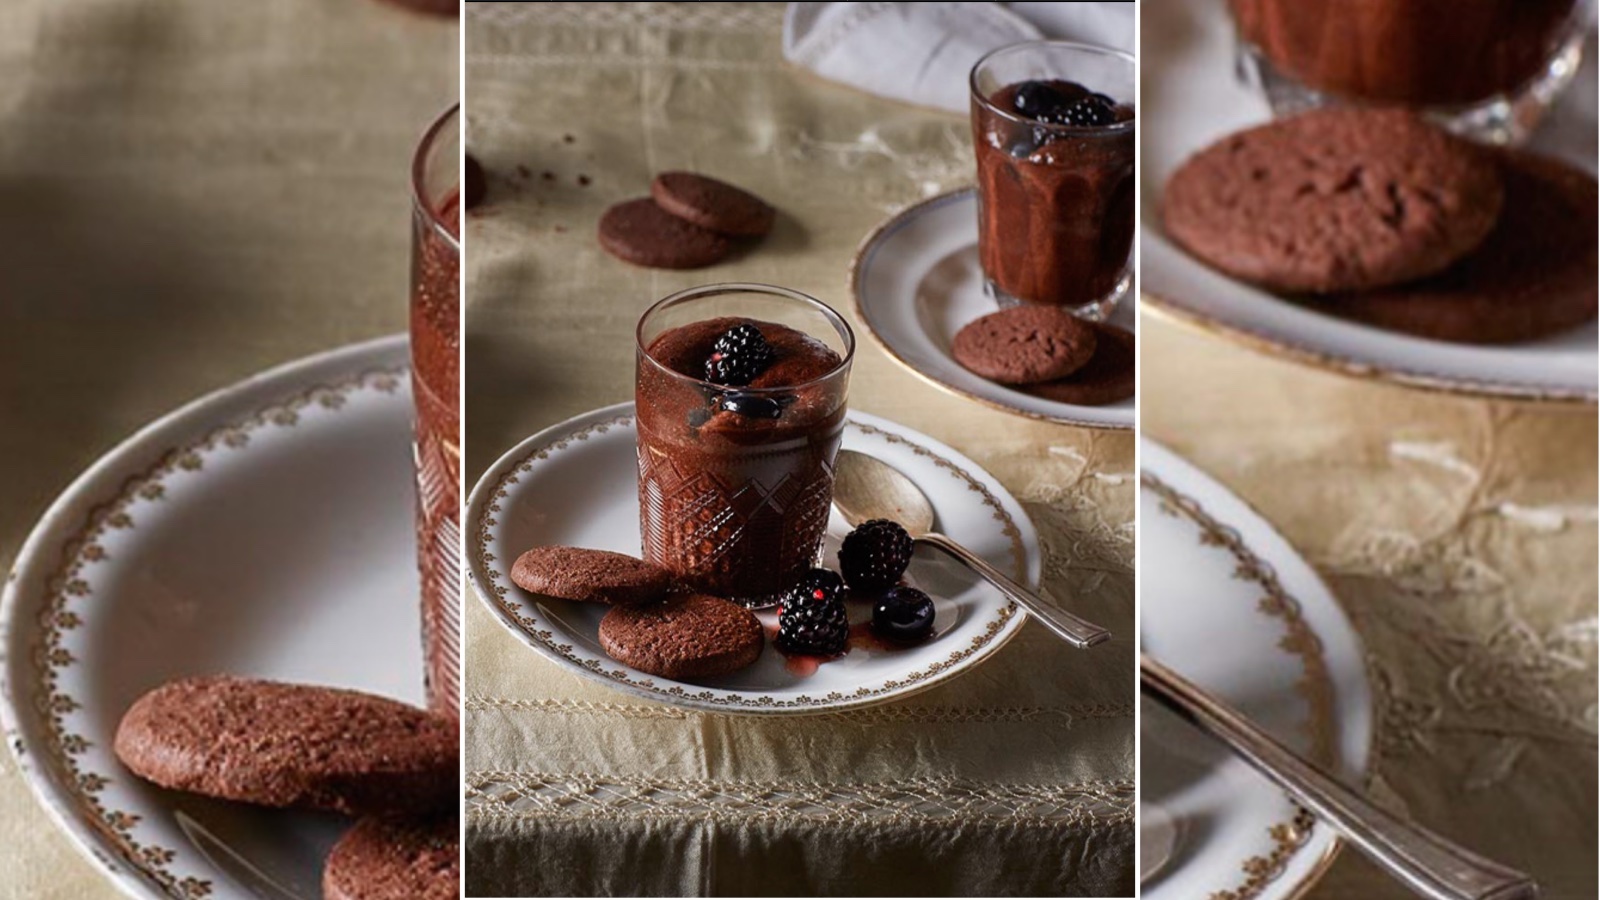 Recipe of the week: Delectably sweet chocolate pot dessert